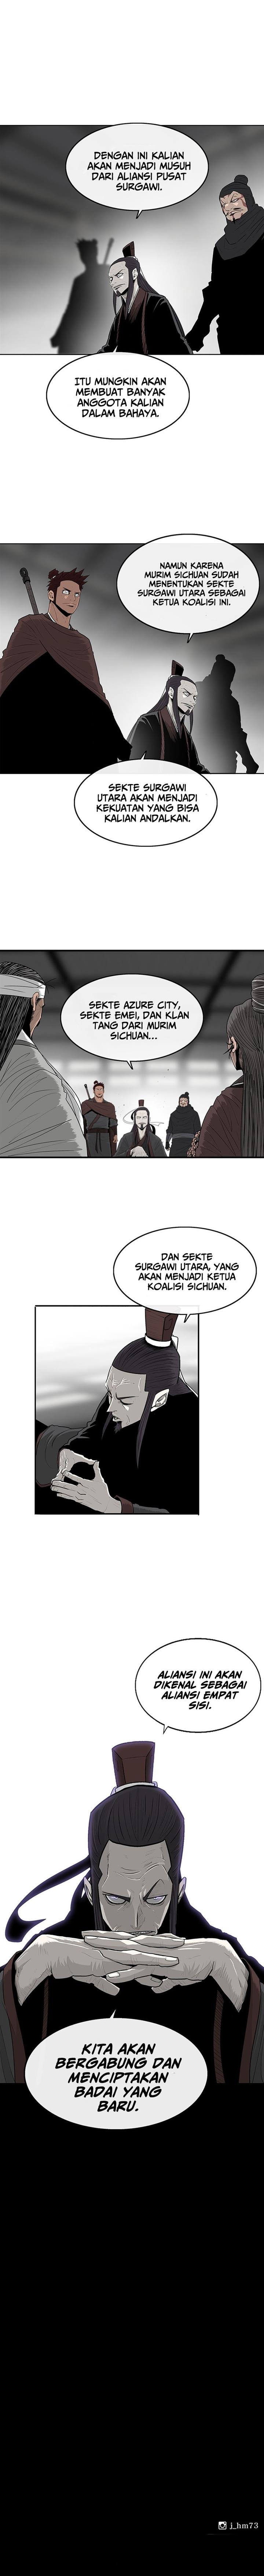 Legend of the Northern Blade Chapter 151